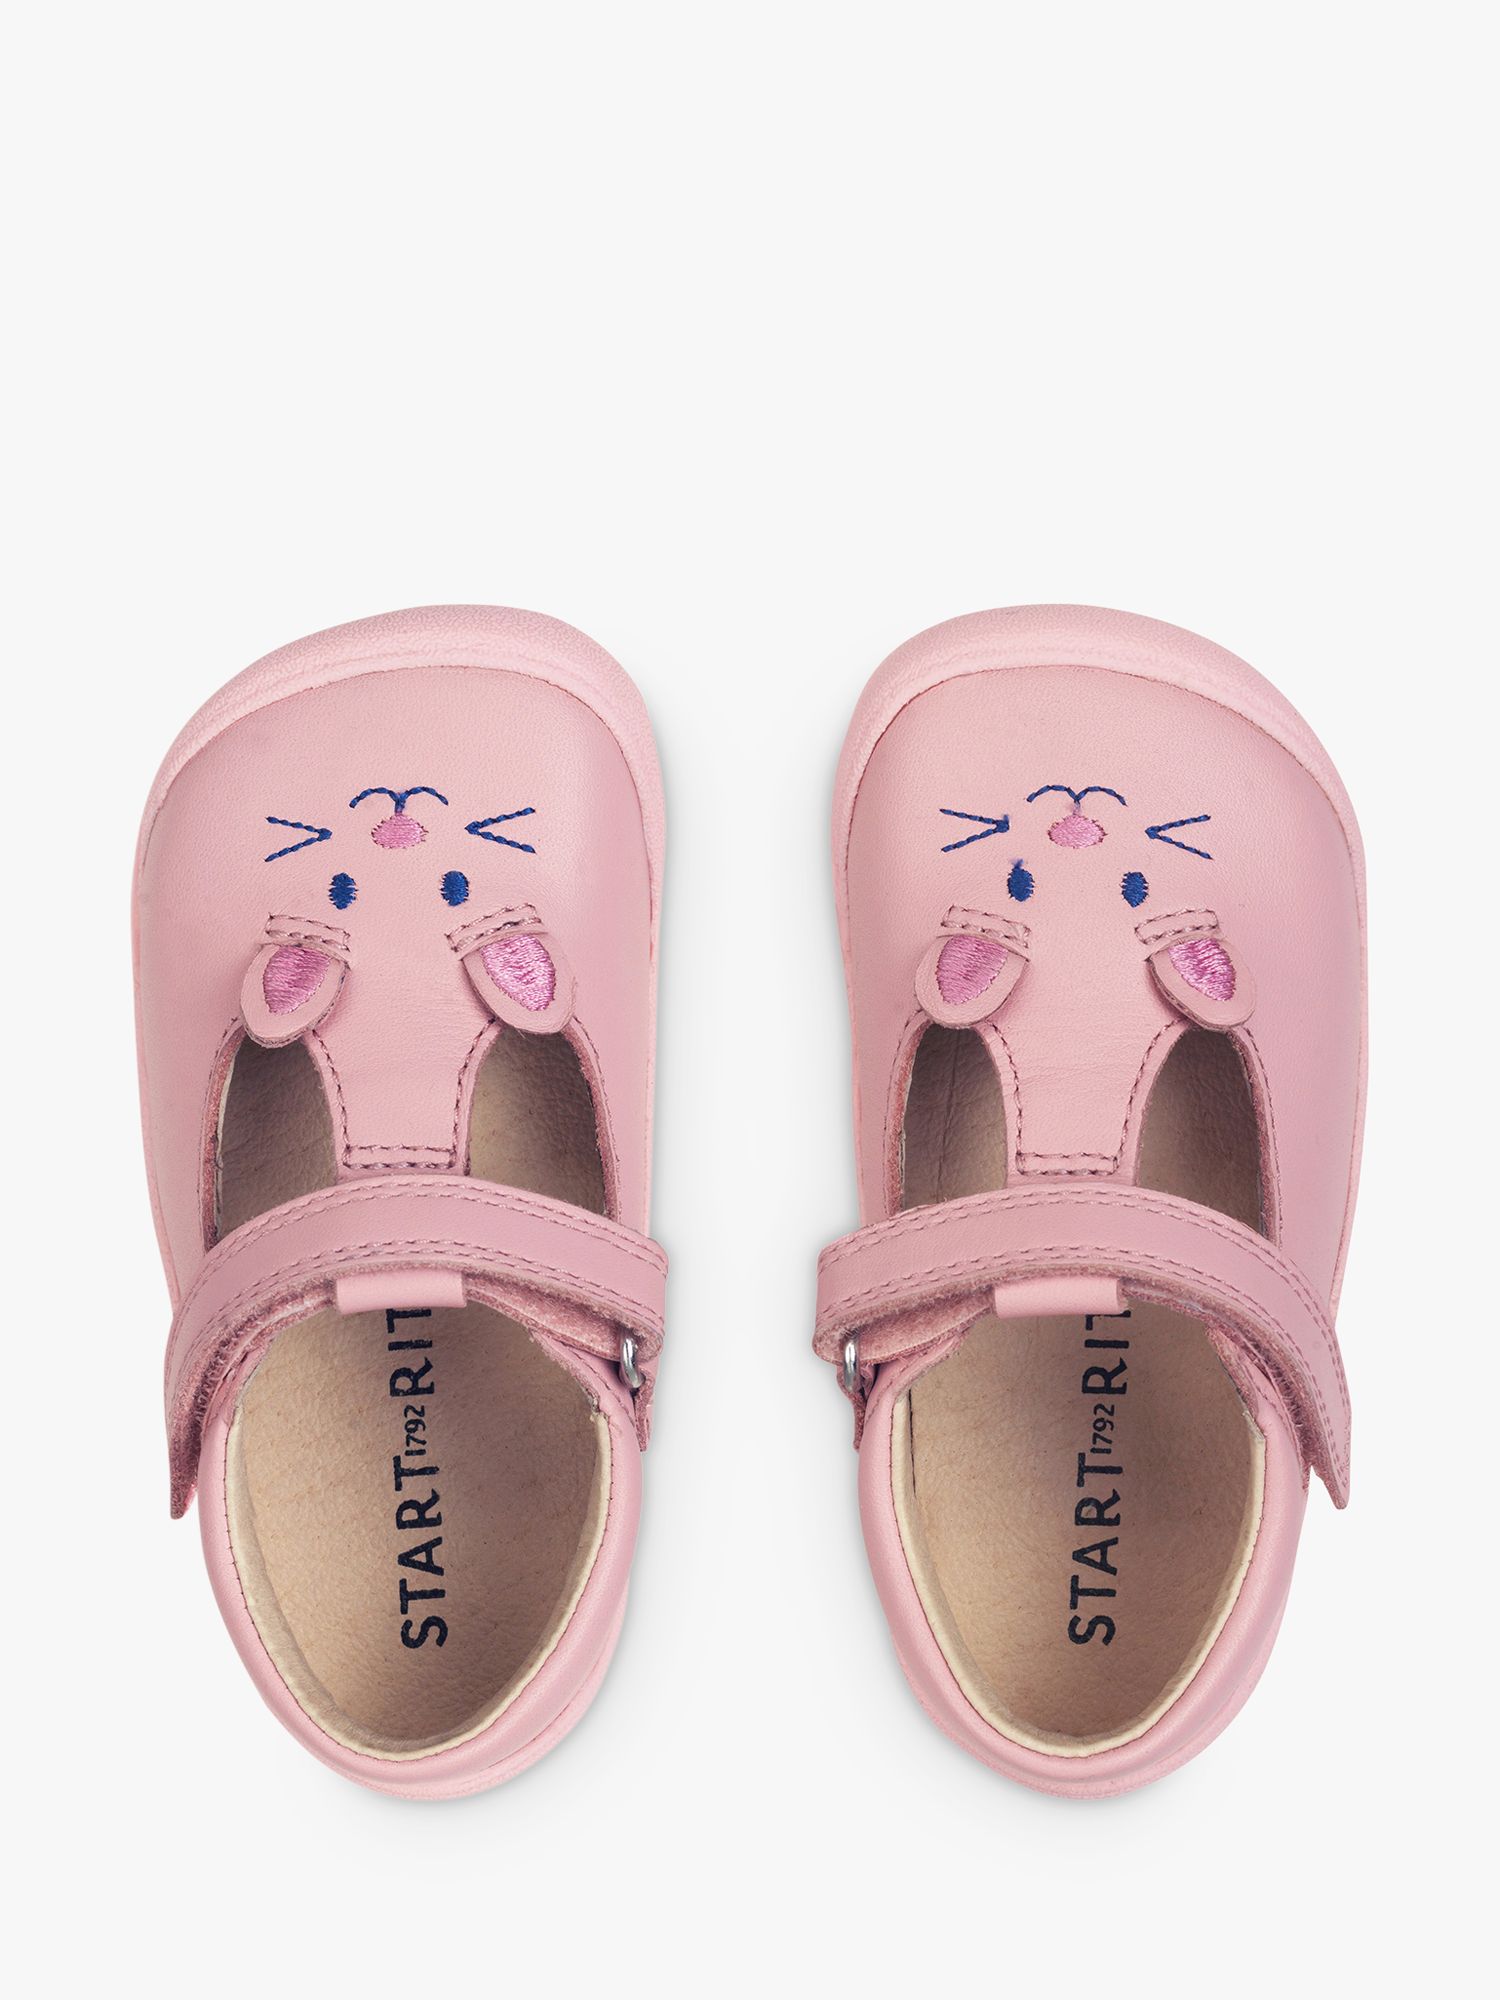 Buy Start-Rite Baby Fellow Leather First Steps Shoes, Pink Online at johnlewis.com